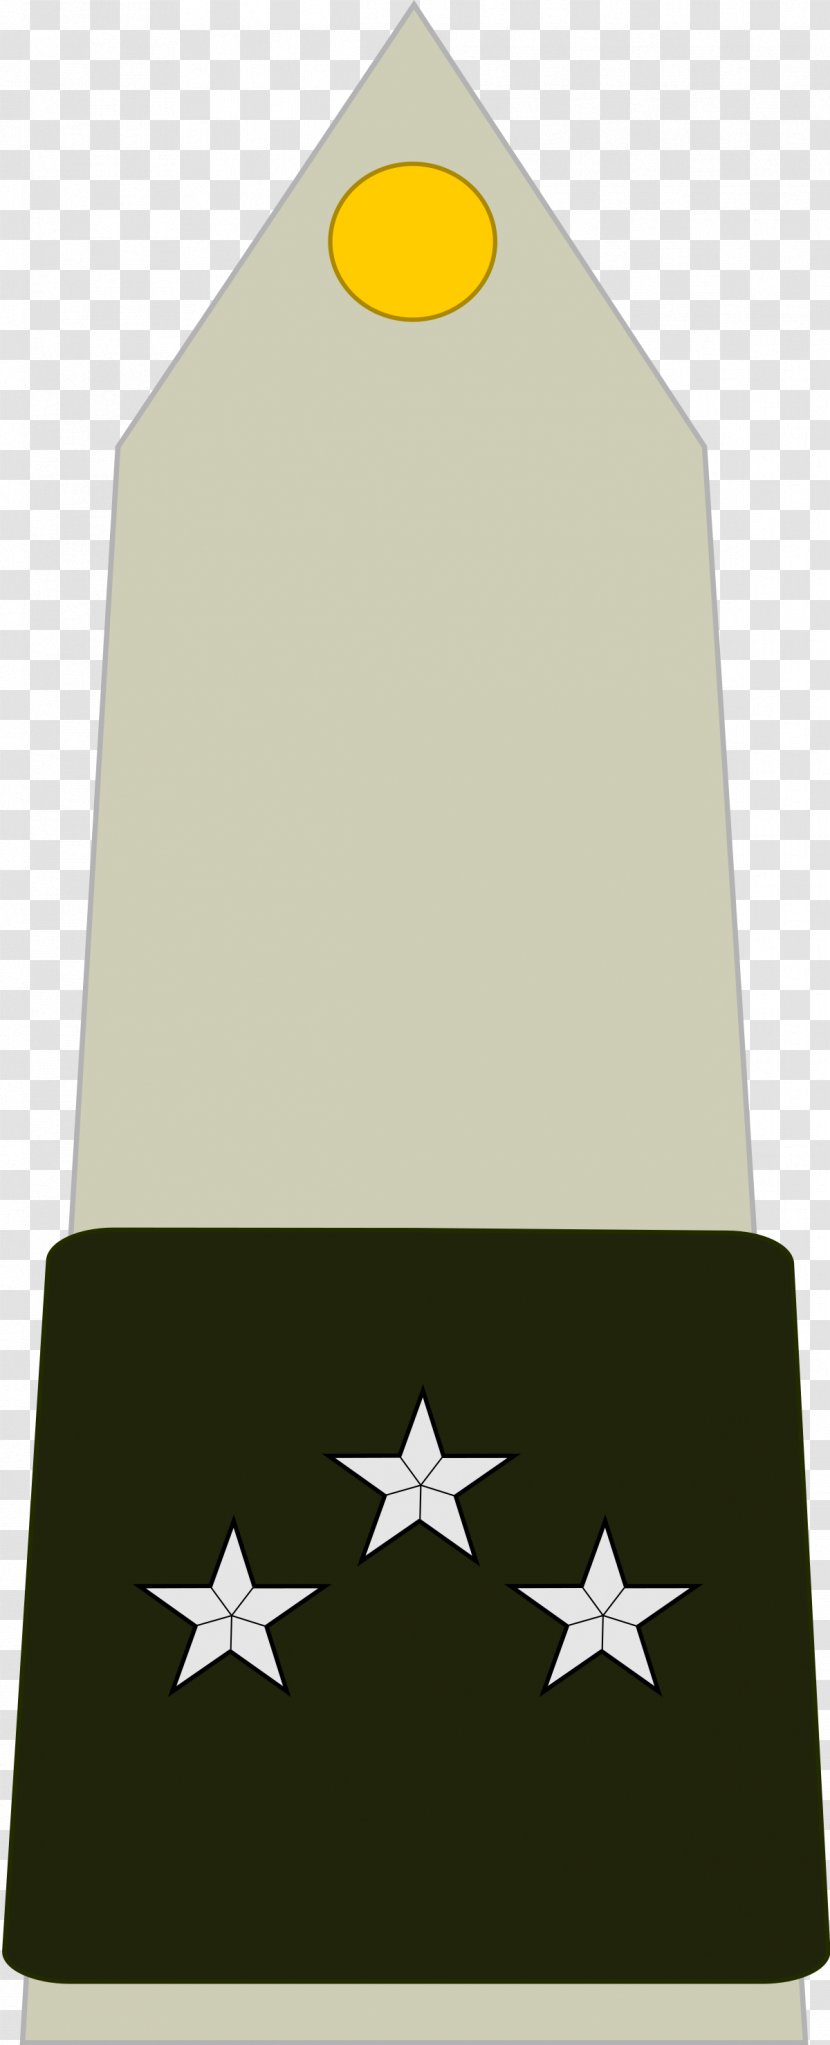 Army General Corps Military Rank - Lieutenant Transparent PNG